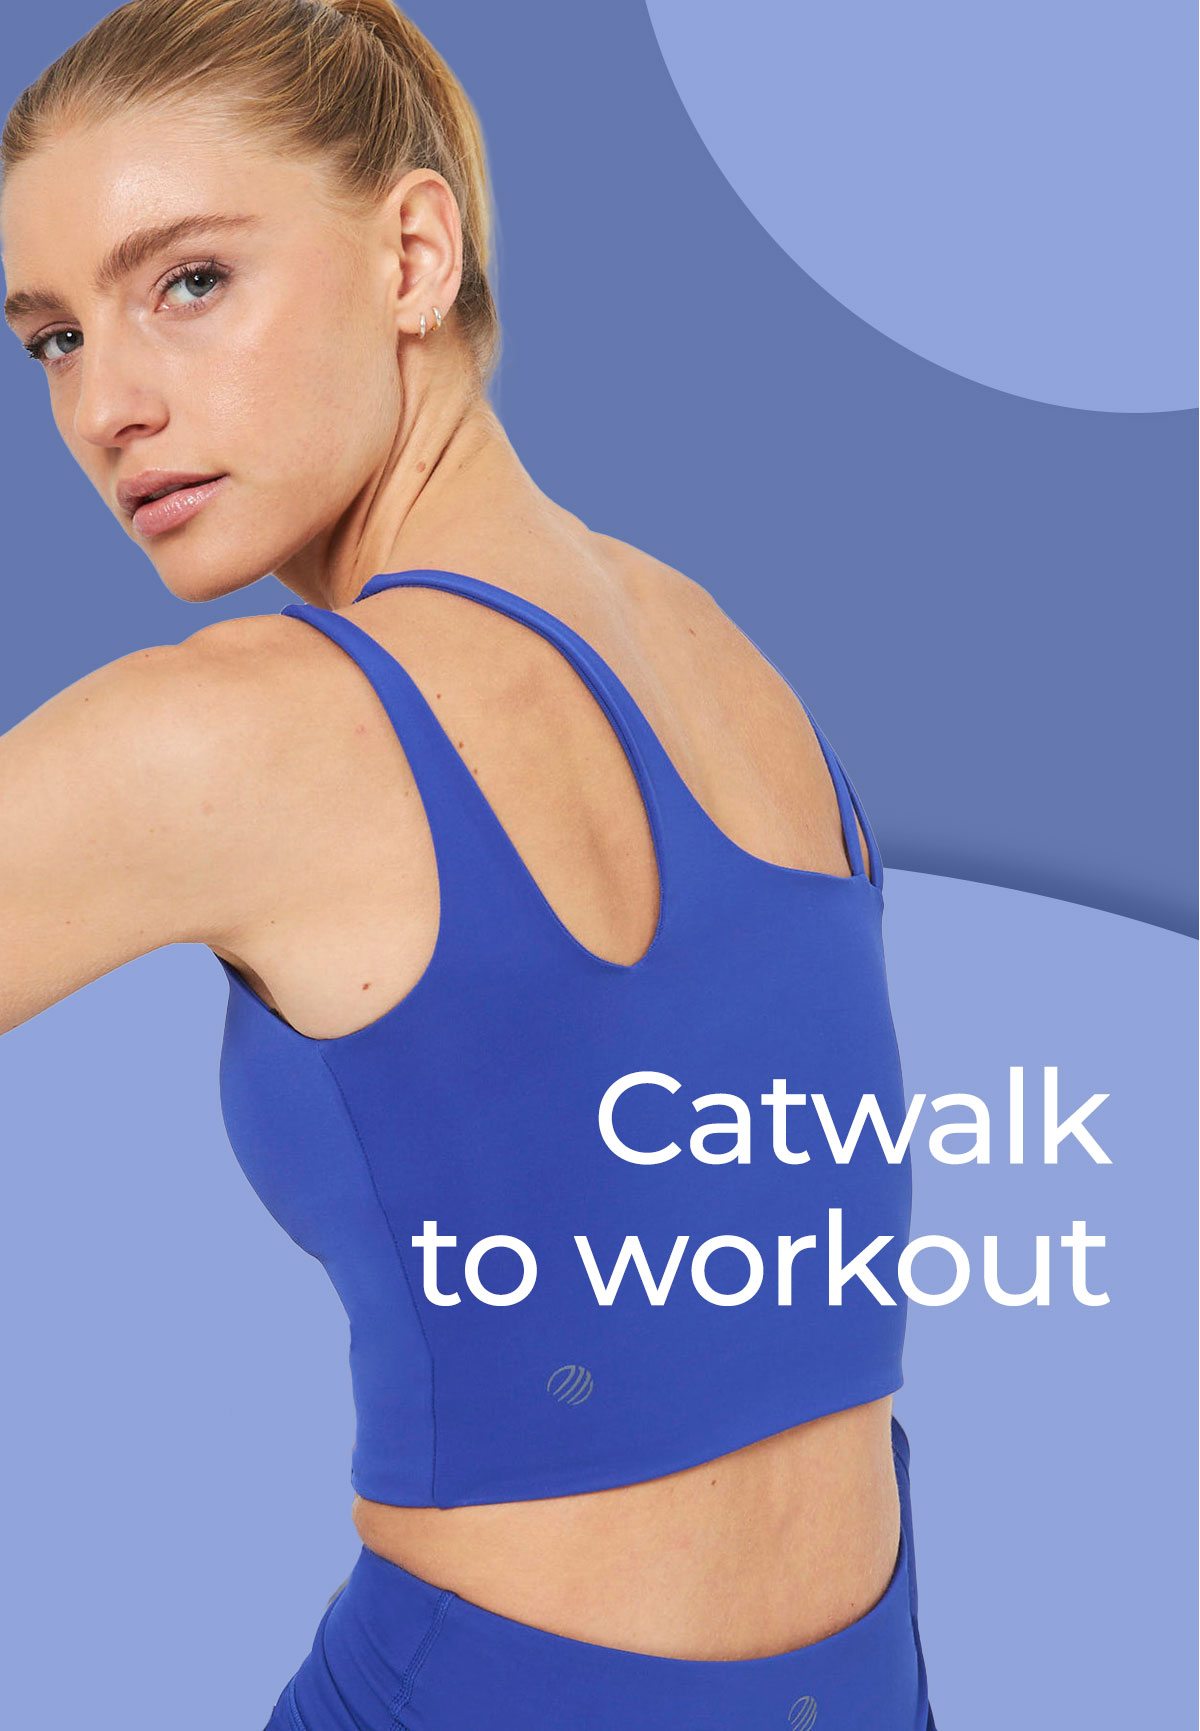 Catwalk to workout